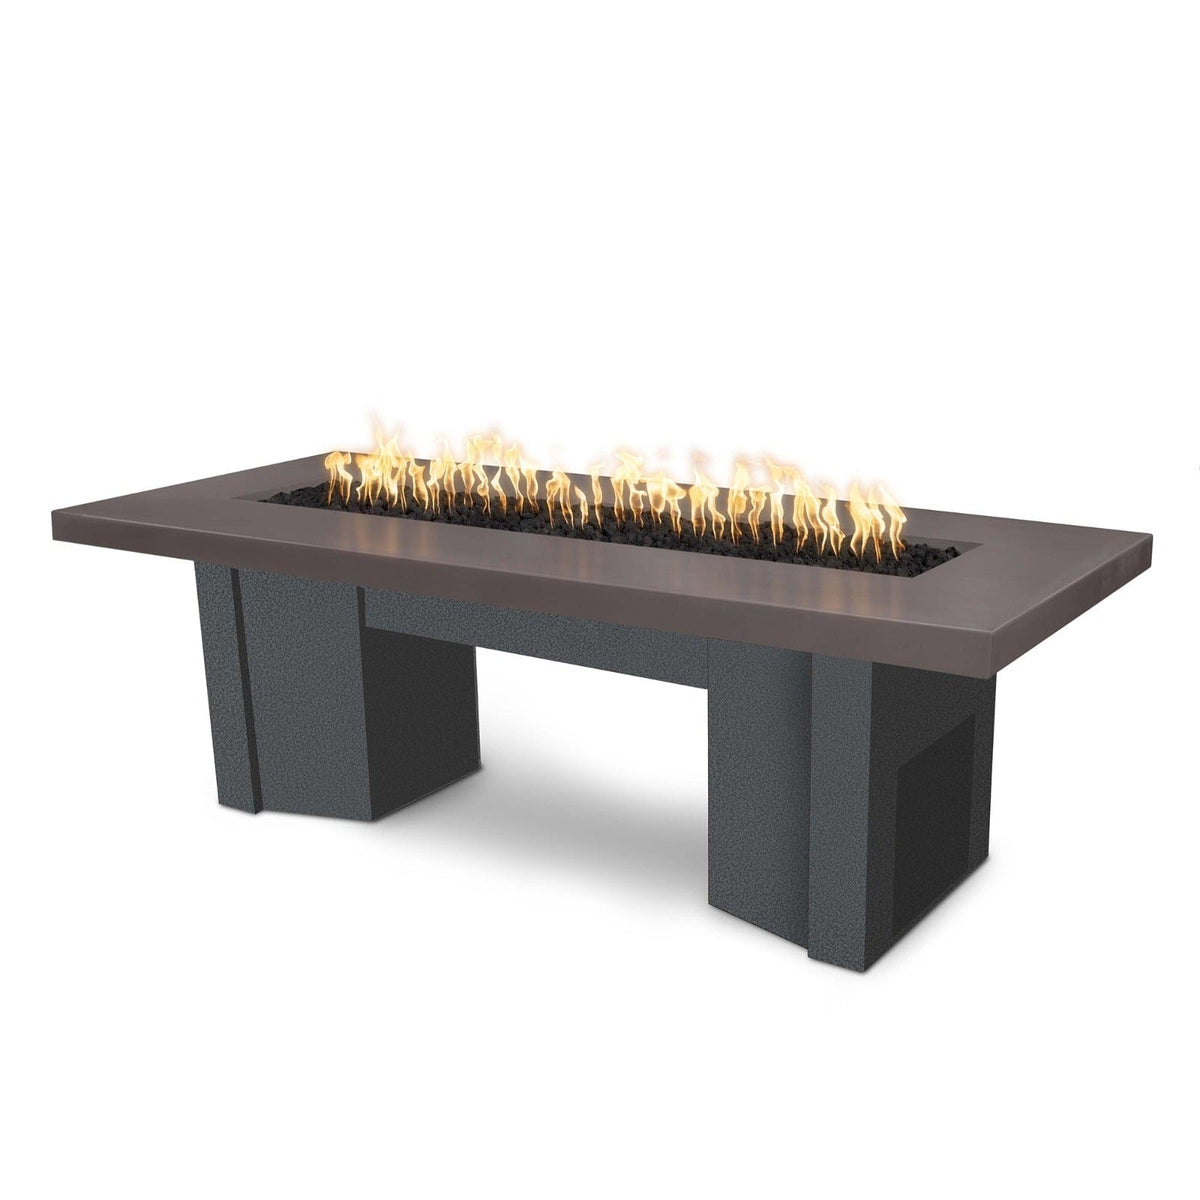 The Outdoor Plus Fire Features Chestnut (-CST) / Silver Vein Powder Coated Steel (-SLV) The Outdoor Plus 60&quot; Alameda Fire Table Smooth Concrete in Liquid Propane - 110V Plug &amp; Play Electronic Ignition / OPT-ALMGFRC60EKIT-LP